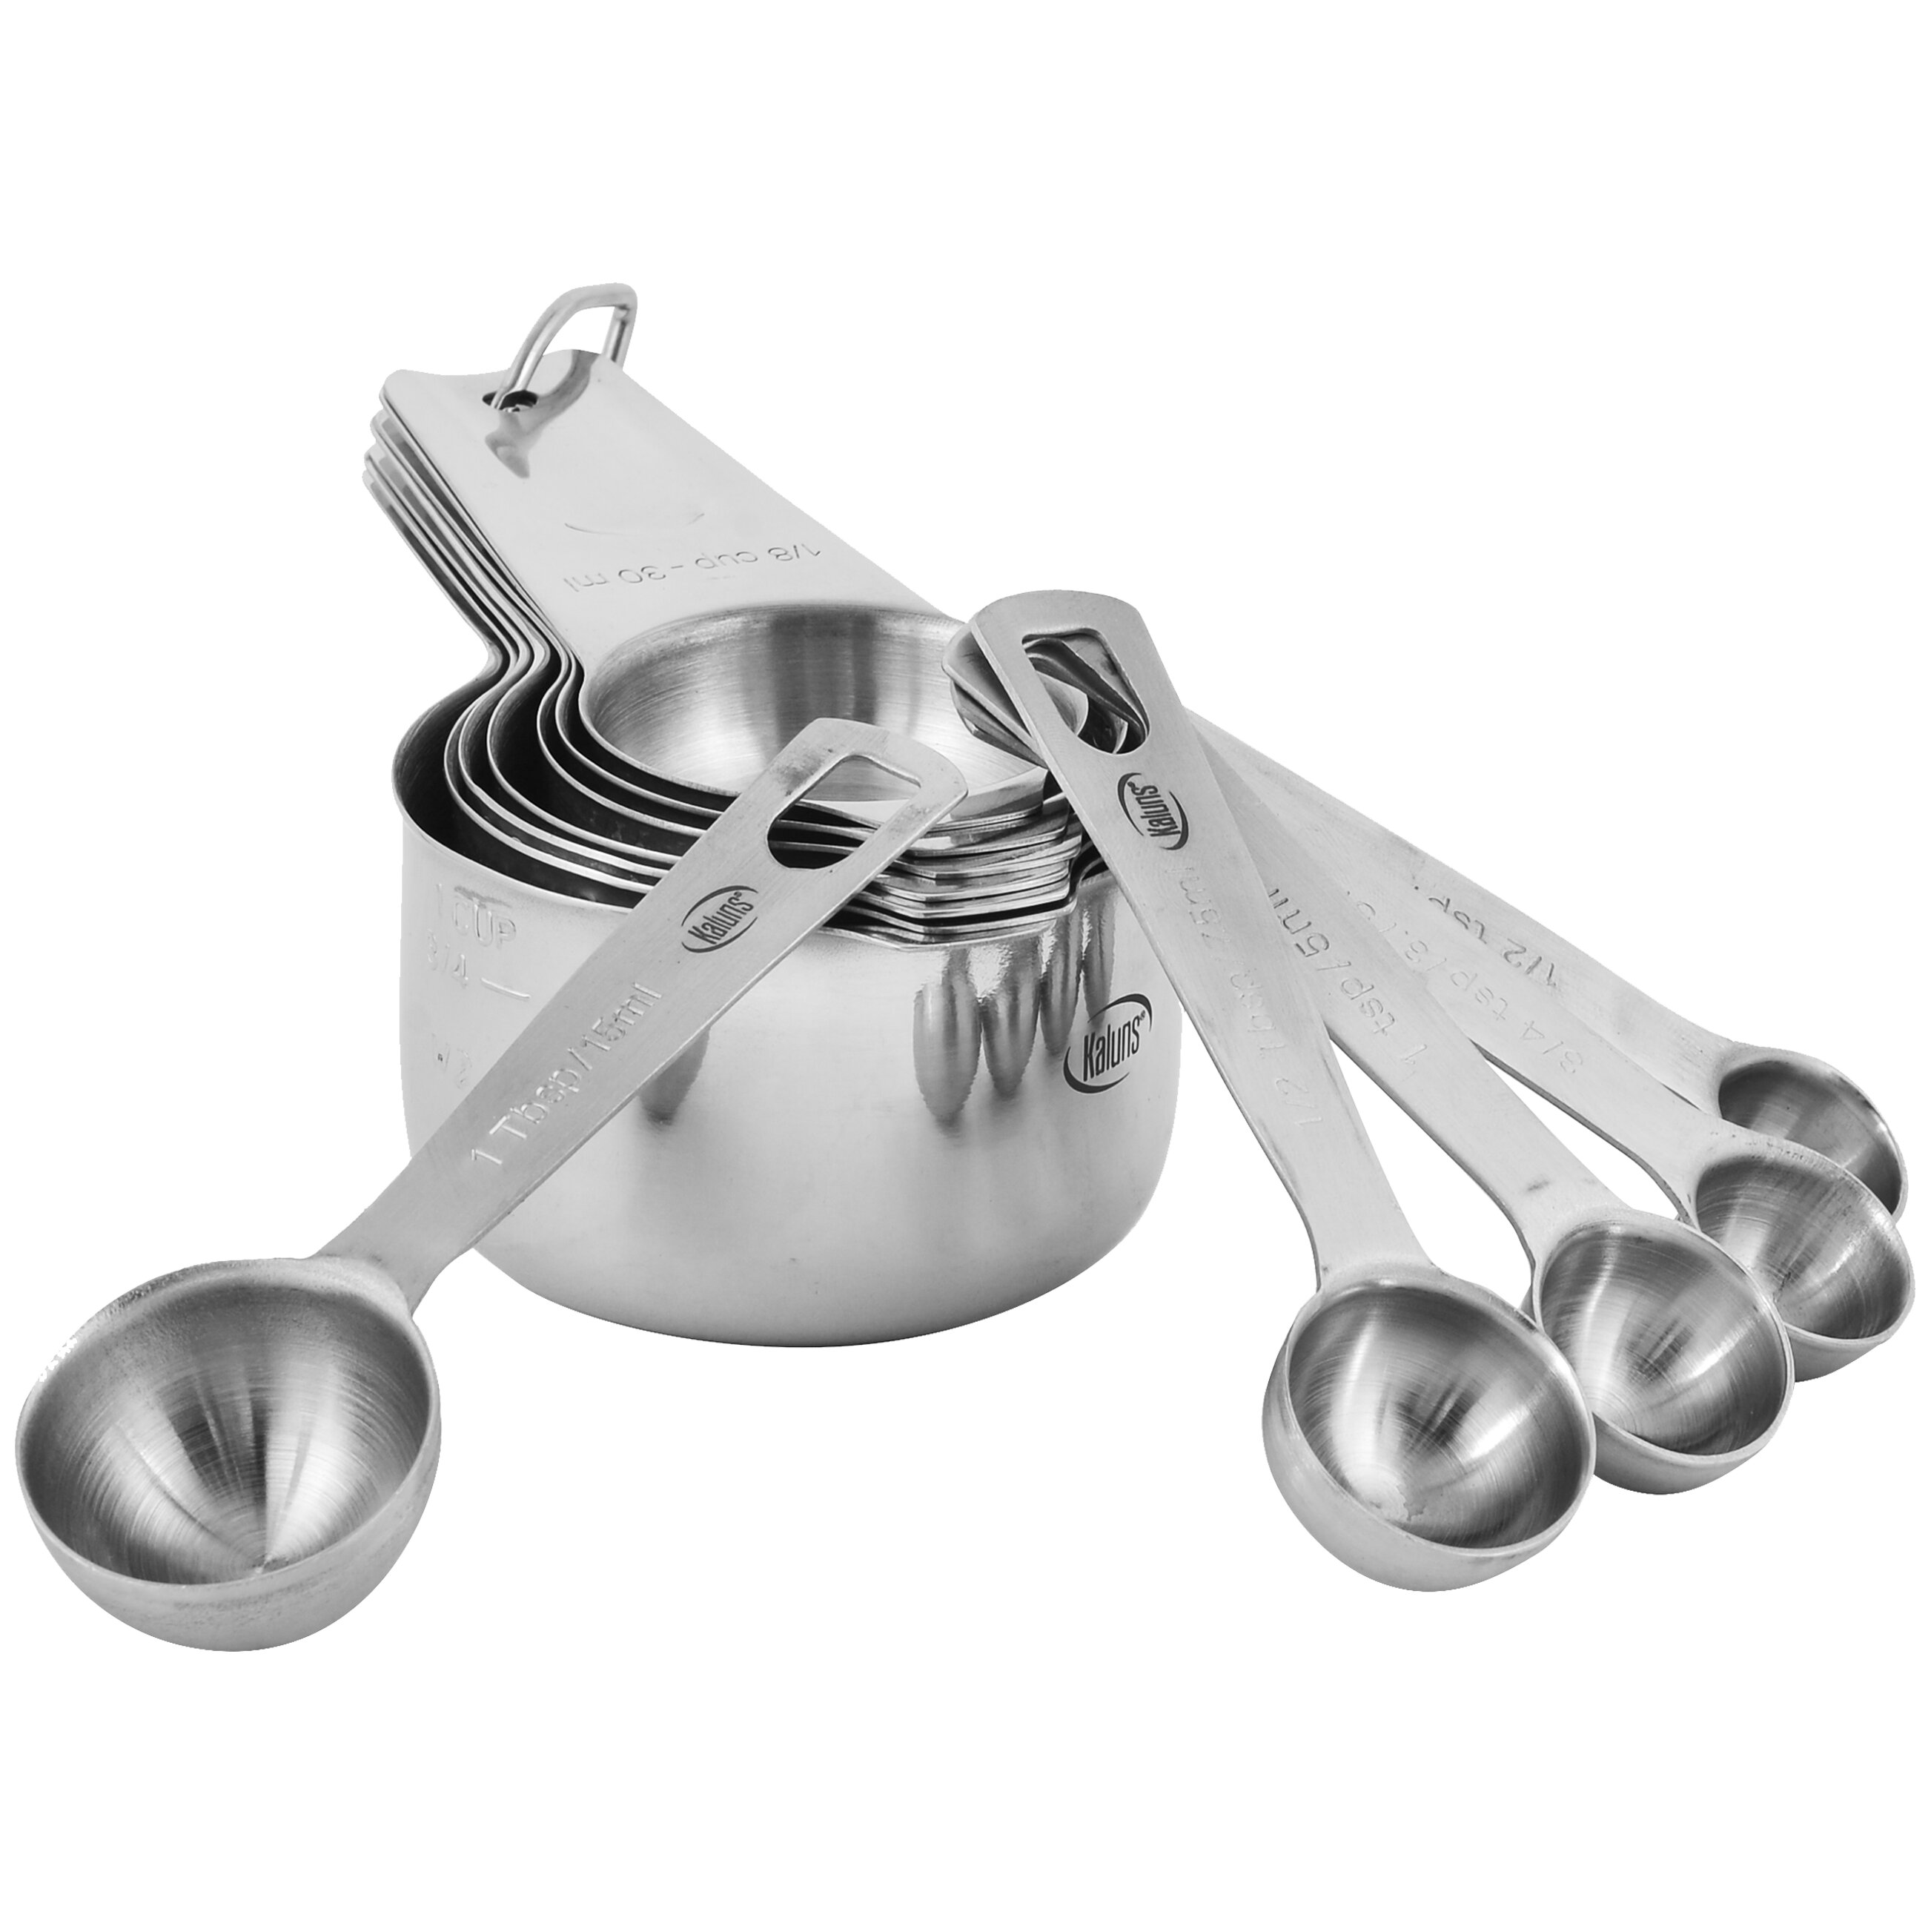 KALUNS 16 -Piece Stainless Steel Measuring Cup And Spoon Set